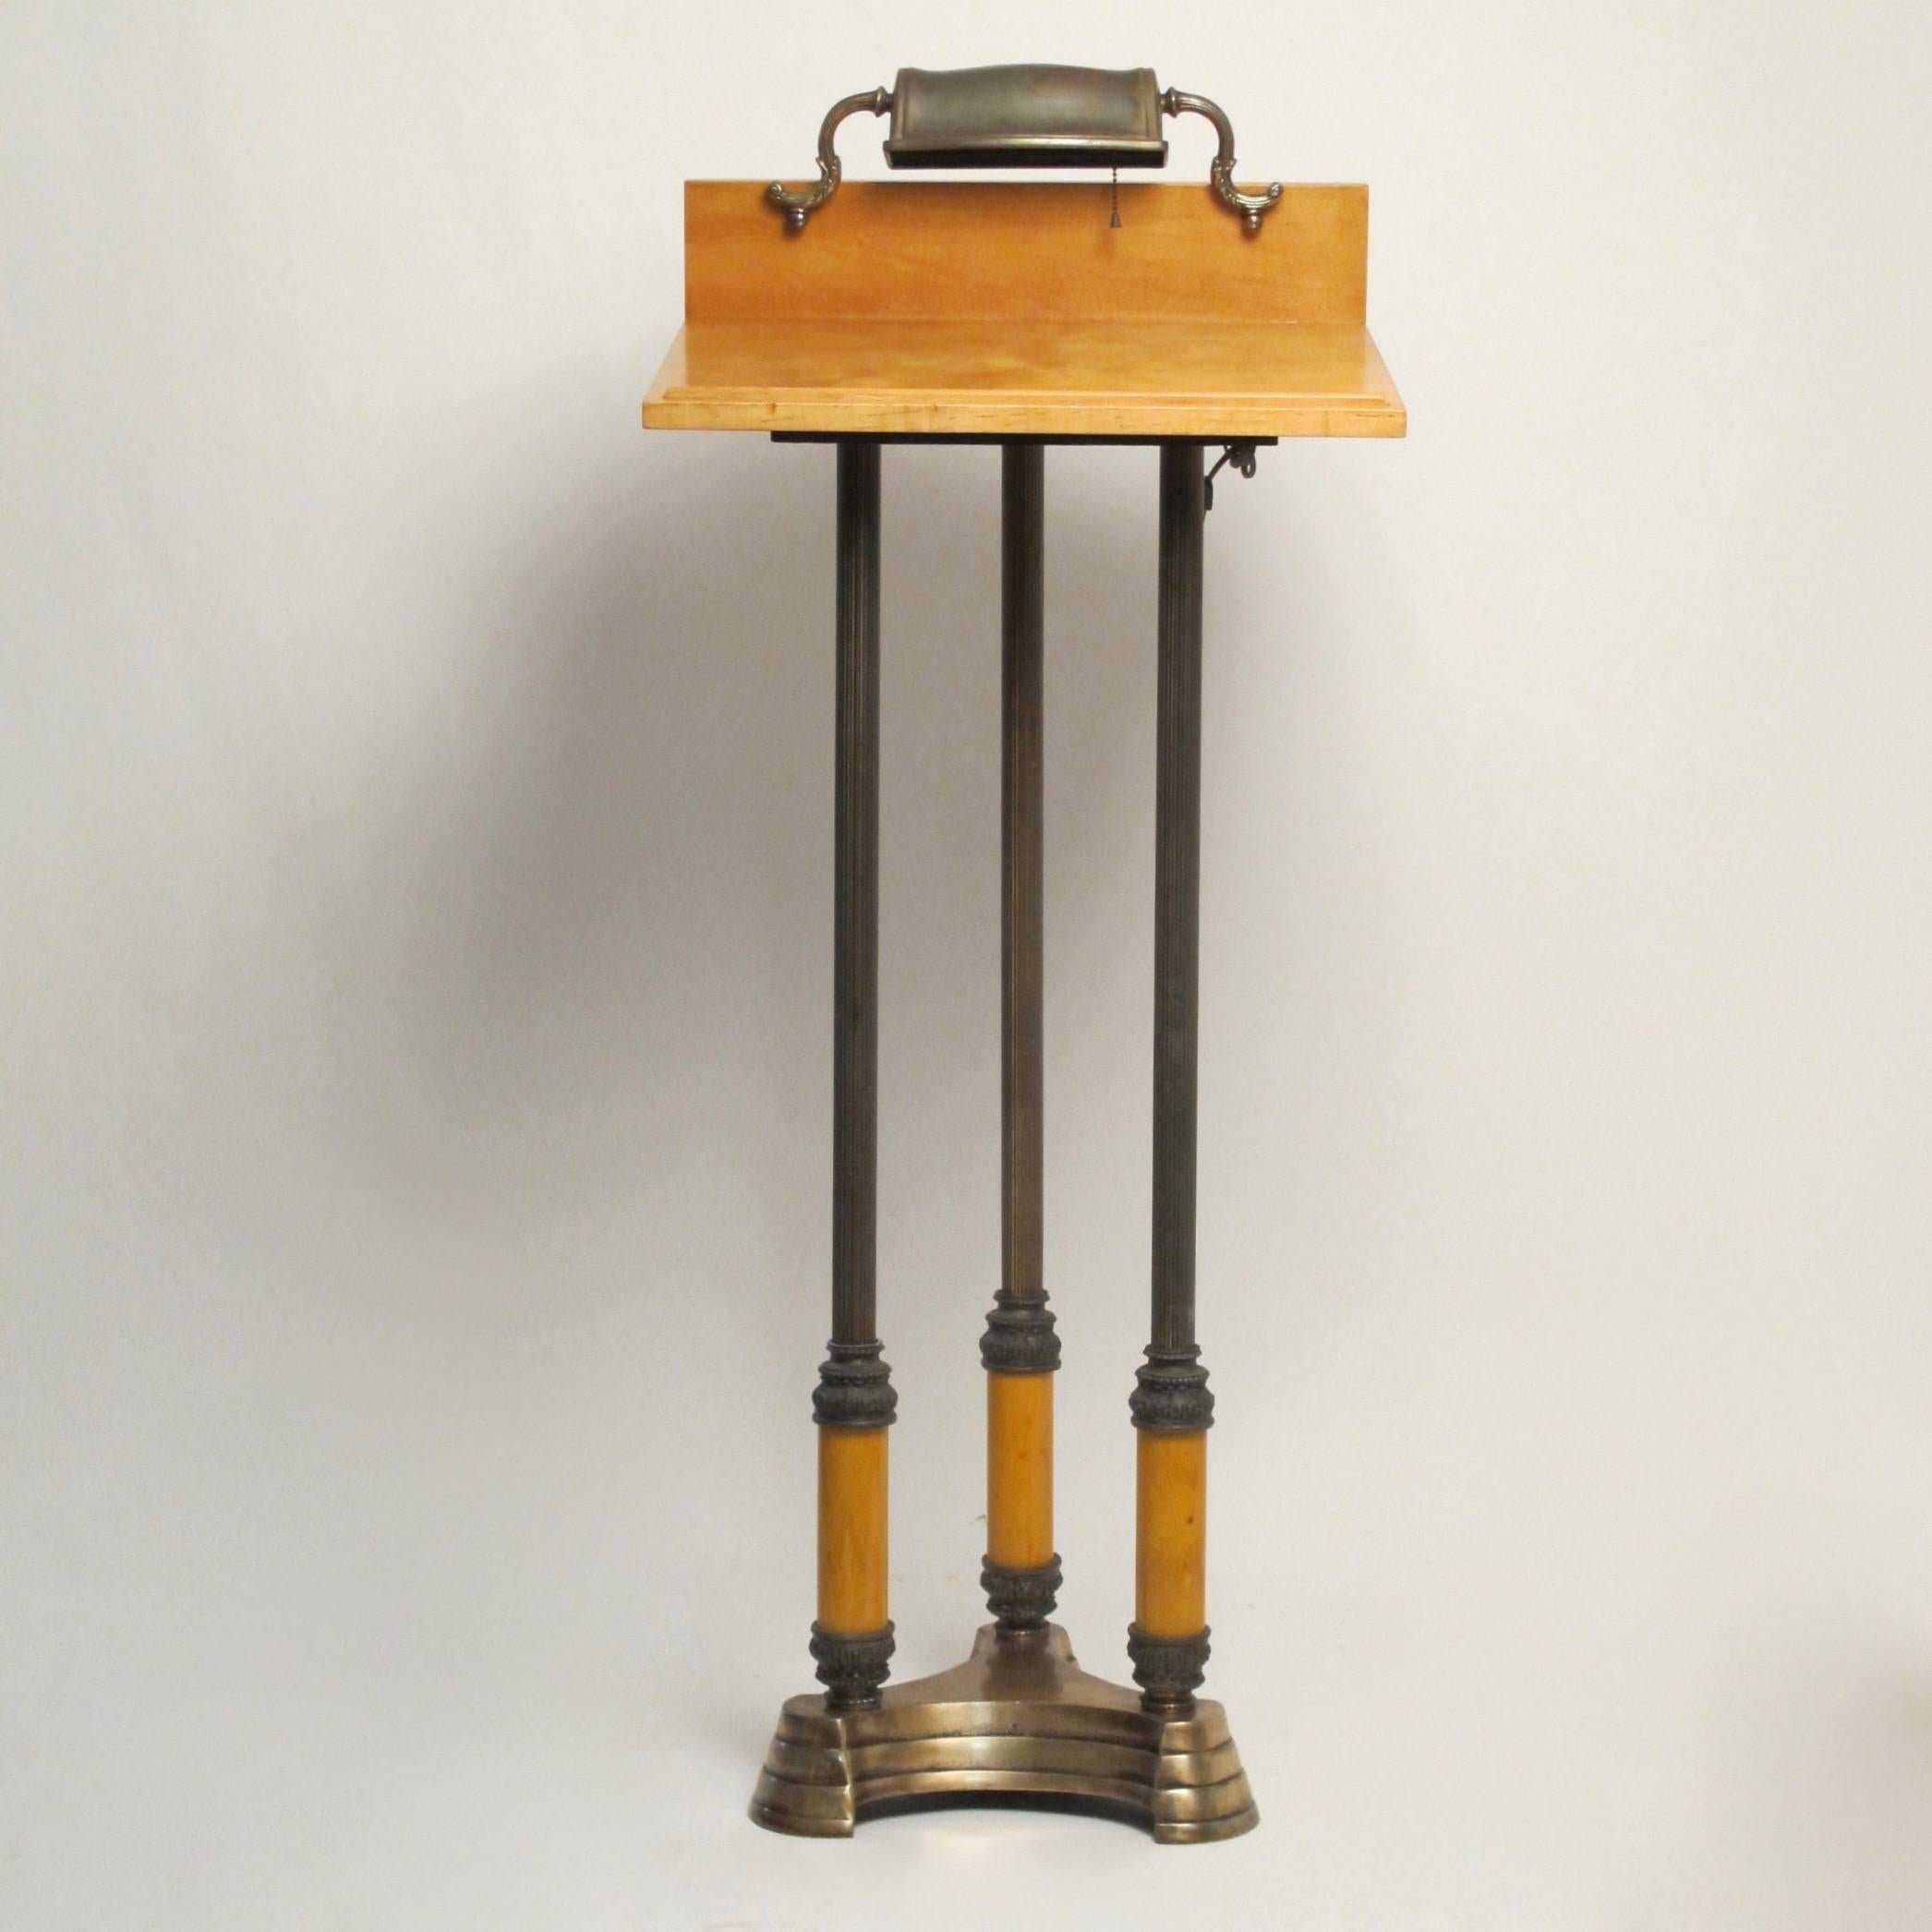 Neoclassical style lectern with brass adjustable light. Steel and bakelite with three ribbed column supports, standing on a bronze plated stepped base.